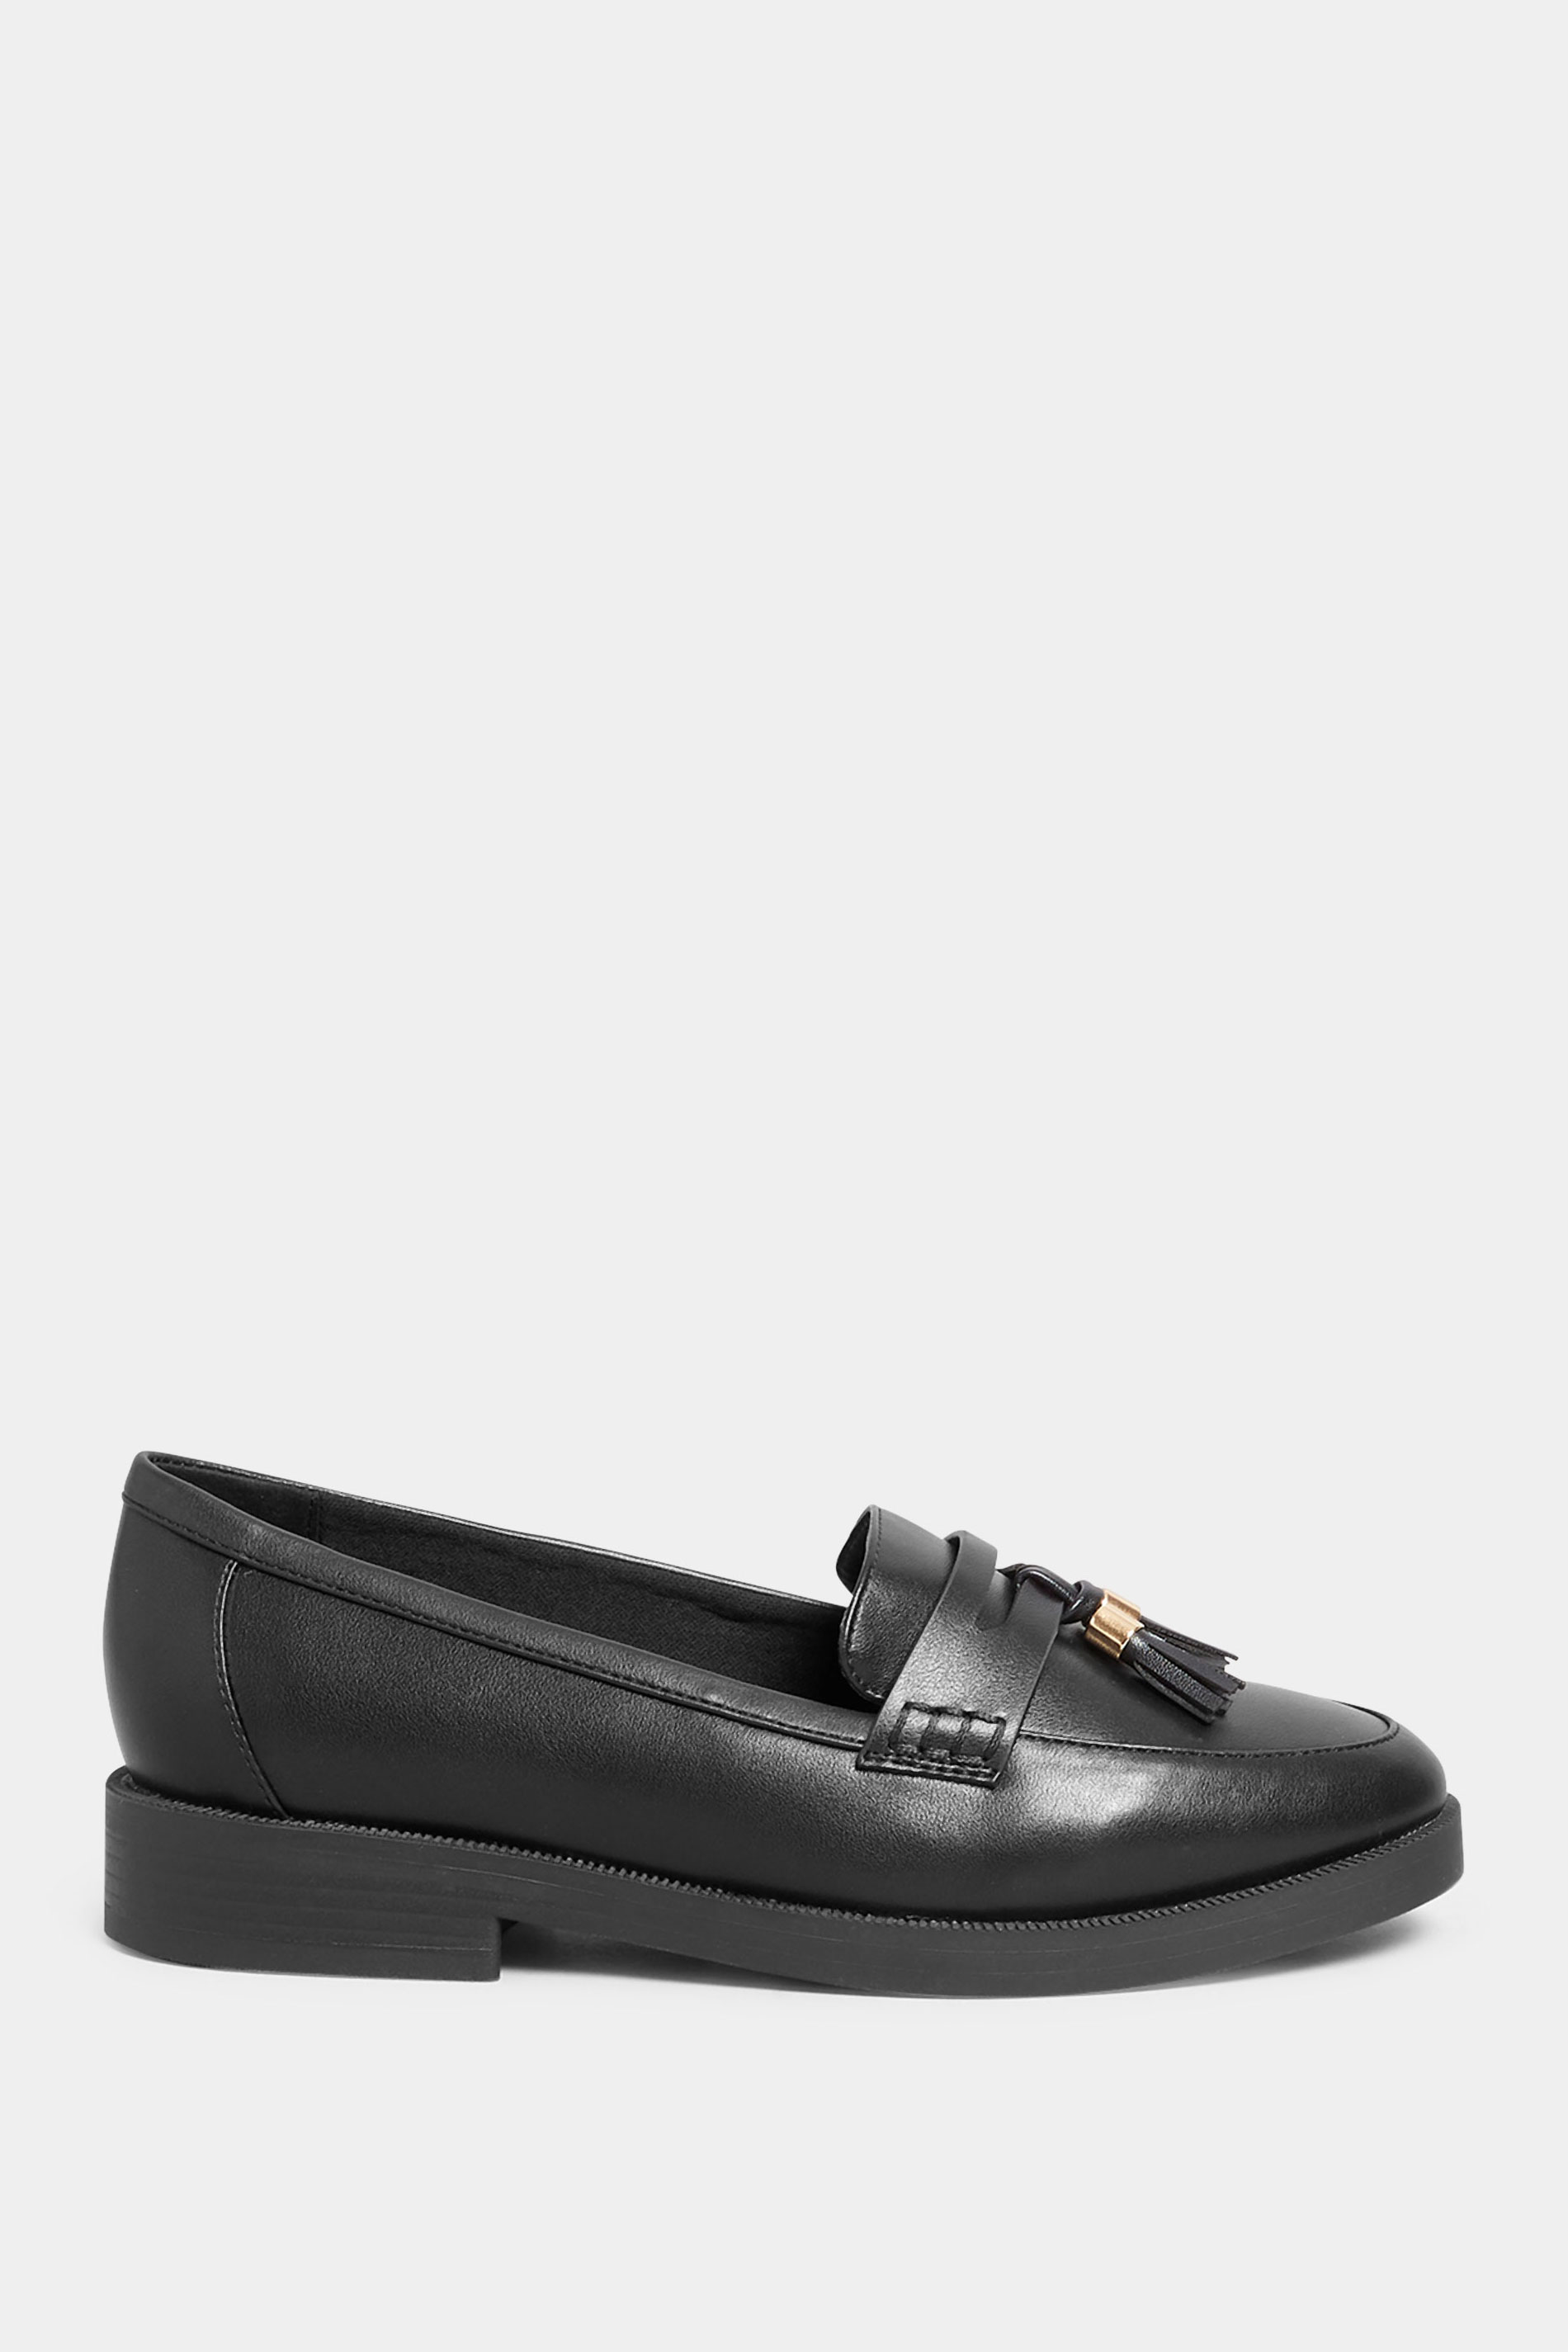 Black Faux Leather Tassel Loafers In Wide E Fit & Extra Wide EEE Fit | Yours Clothing 3